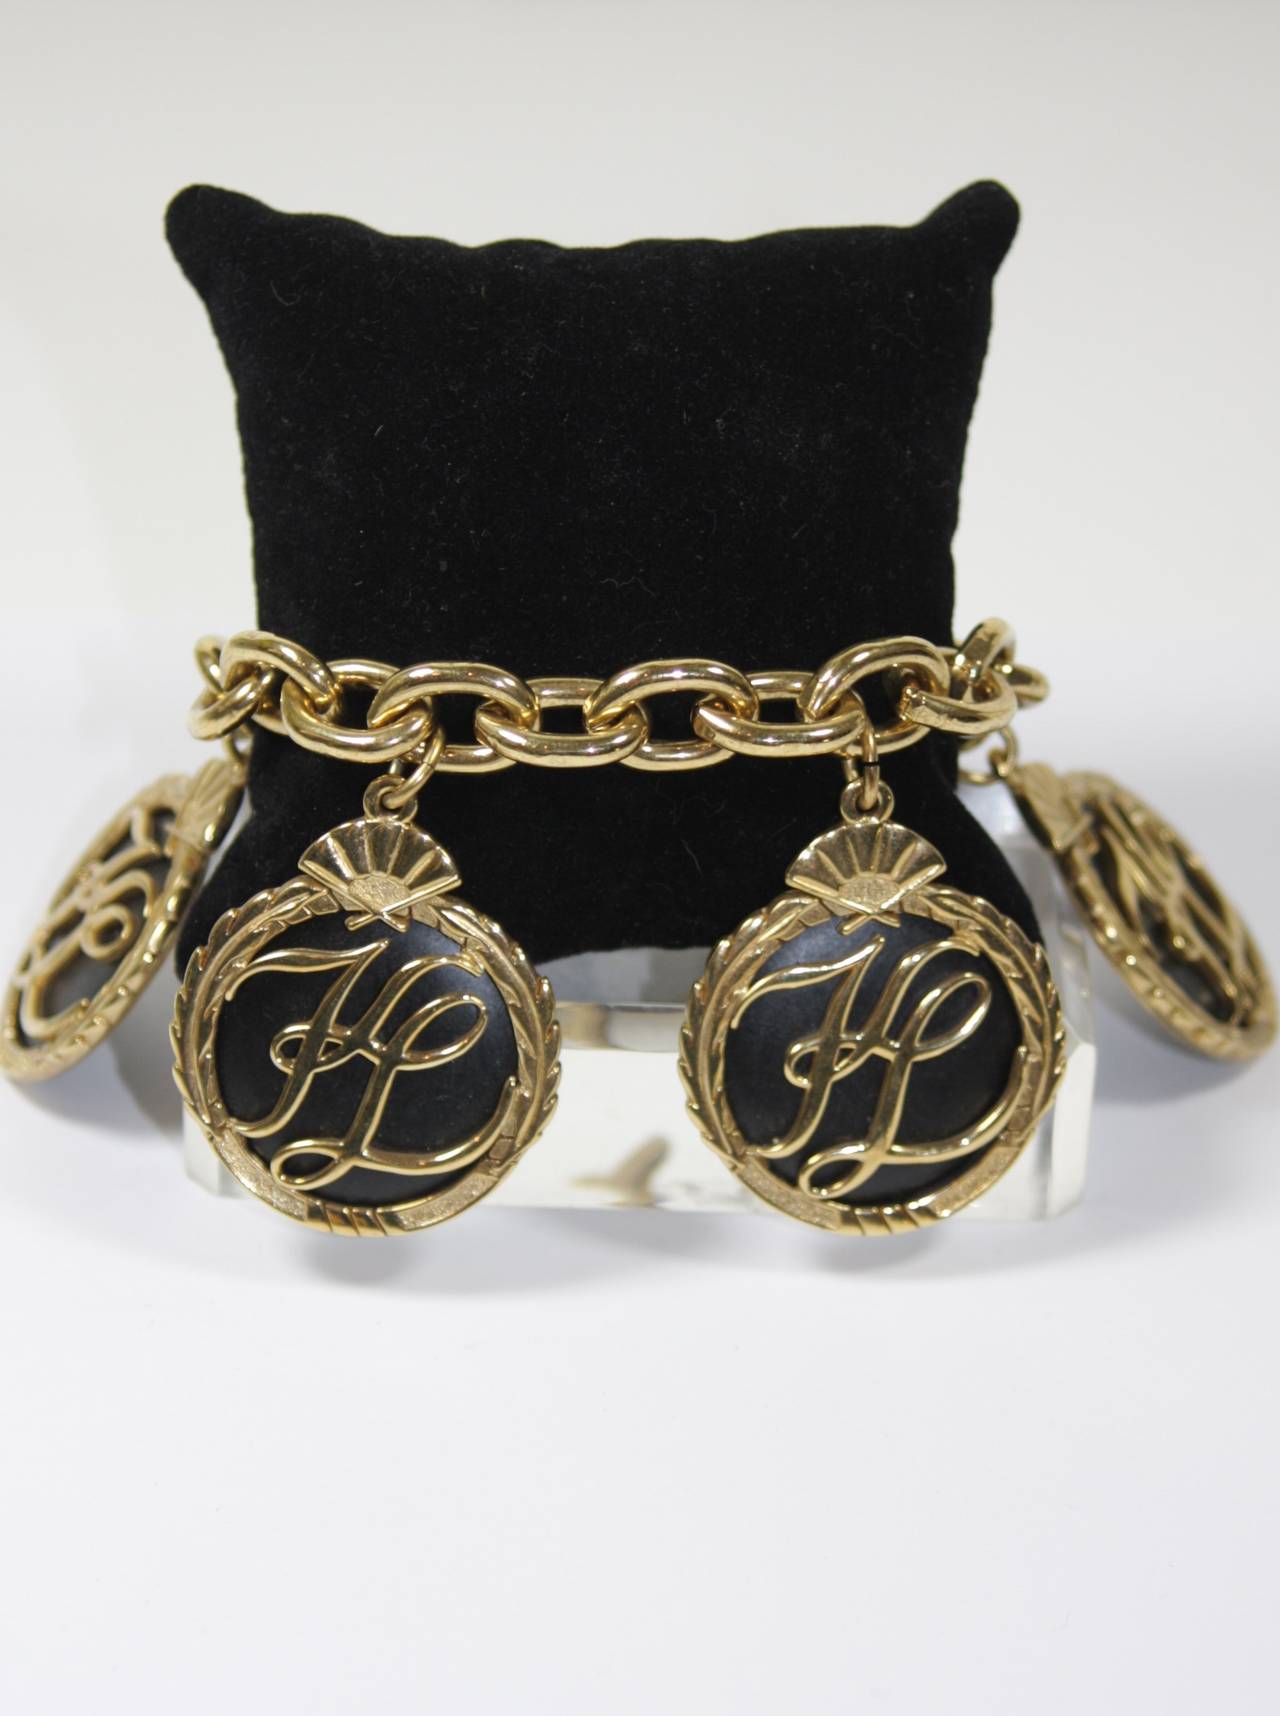 This Karl Lagerfeld bracelet is composed of a black and gold tone material which features  Karl Lagerfeld 